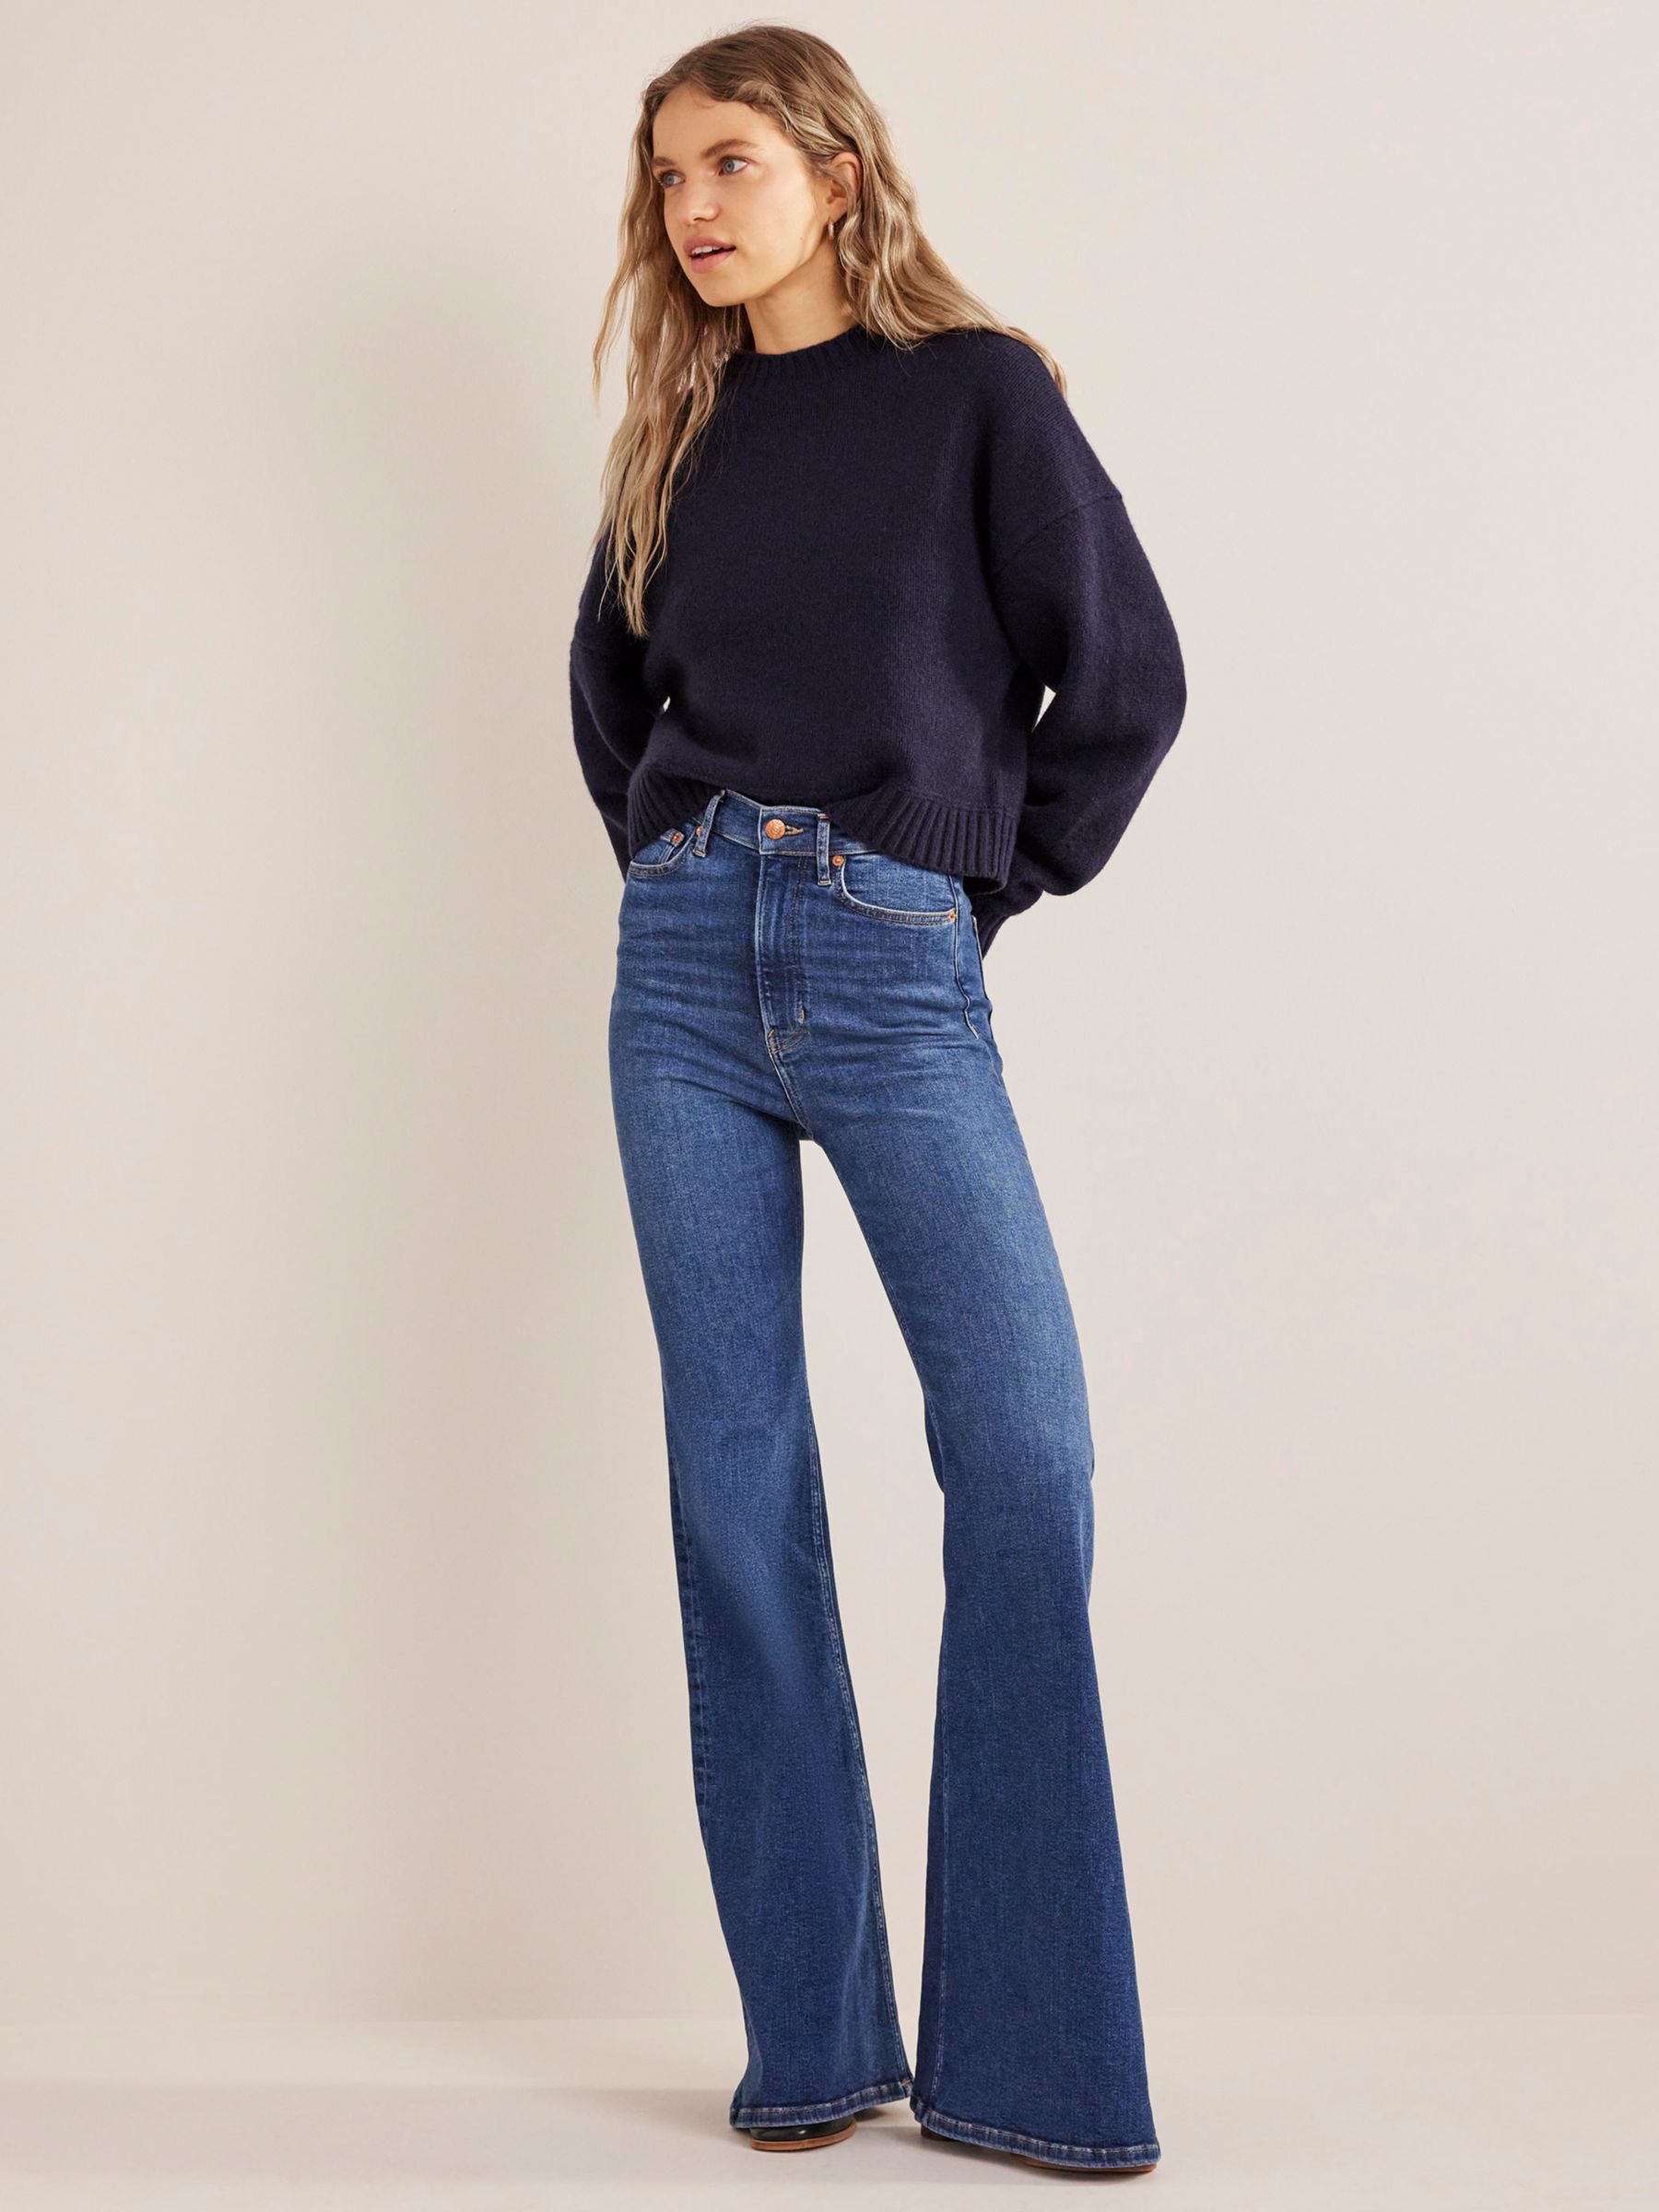 Denim Finds For Fall From JCPenney - 50 IS NOT OLD - A Fashion